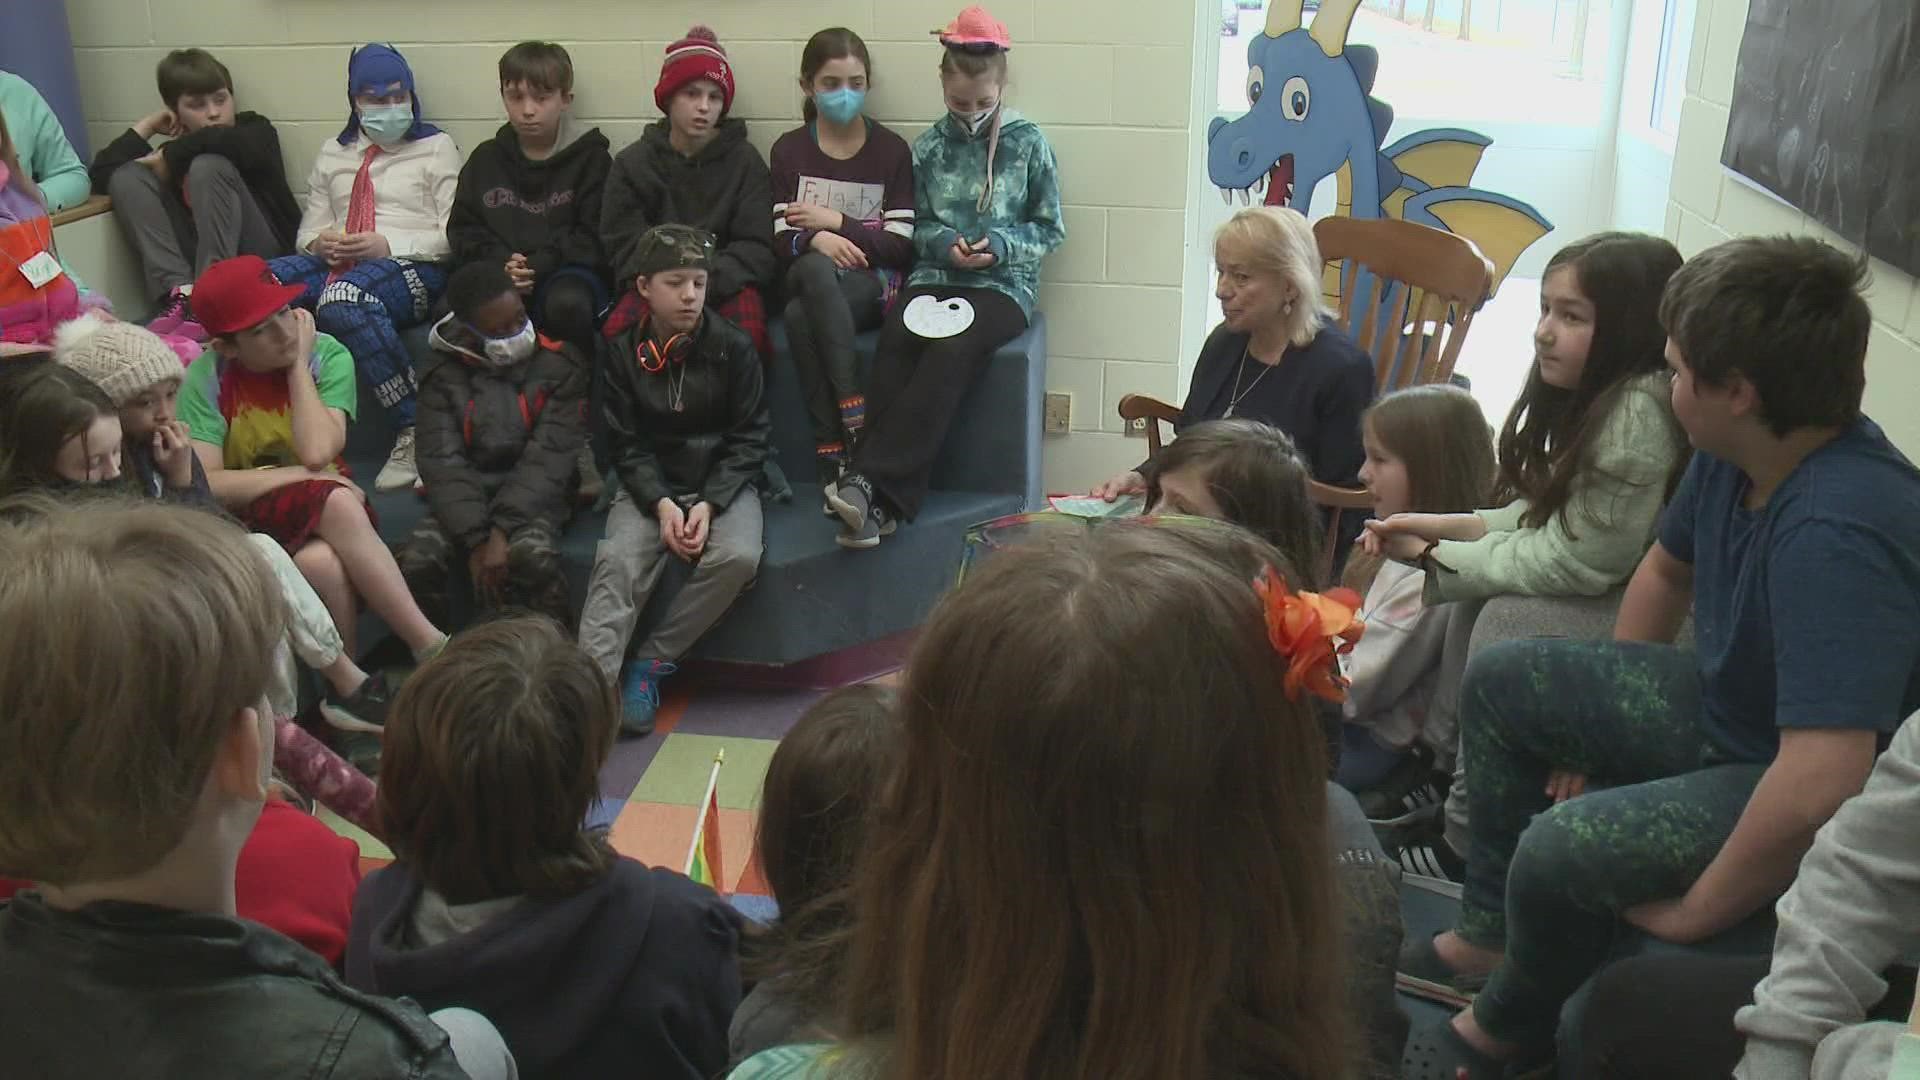 Maine Gov. Janet Mills read to a group of fifth-graders at Dyer Elementary School in South Portland on Wednesday.